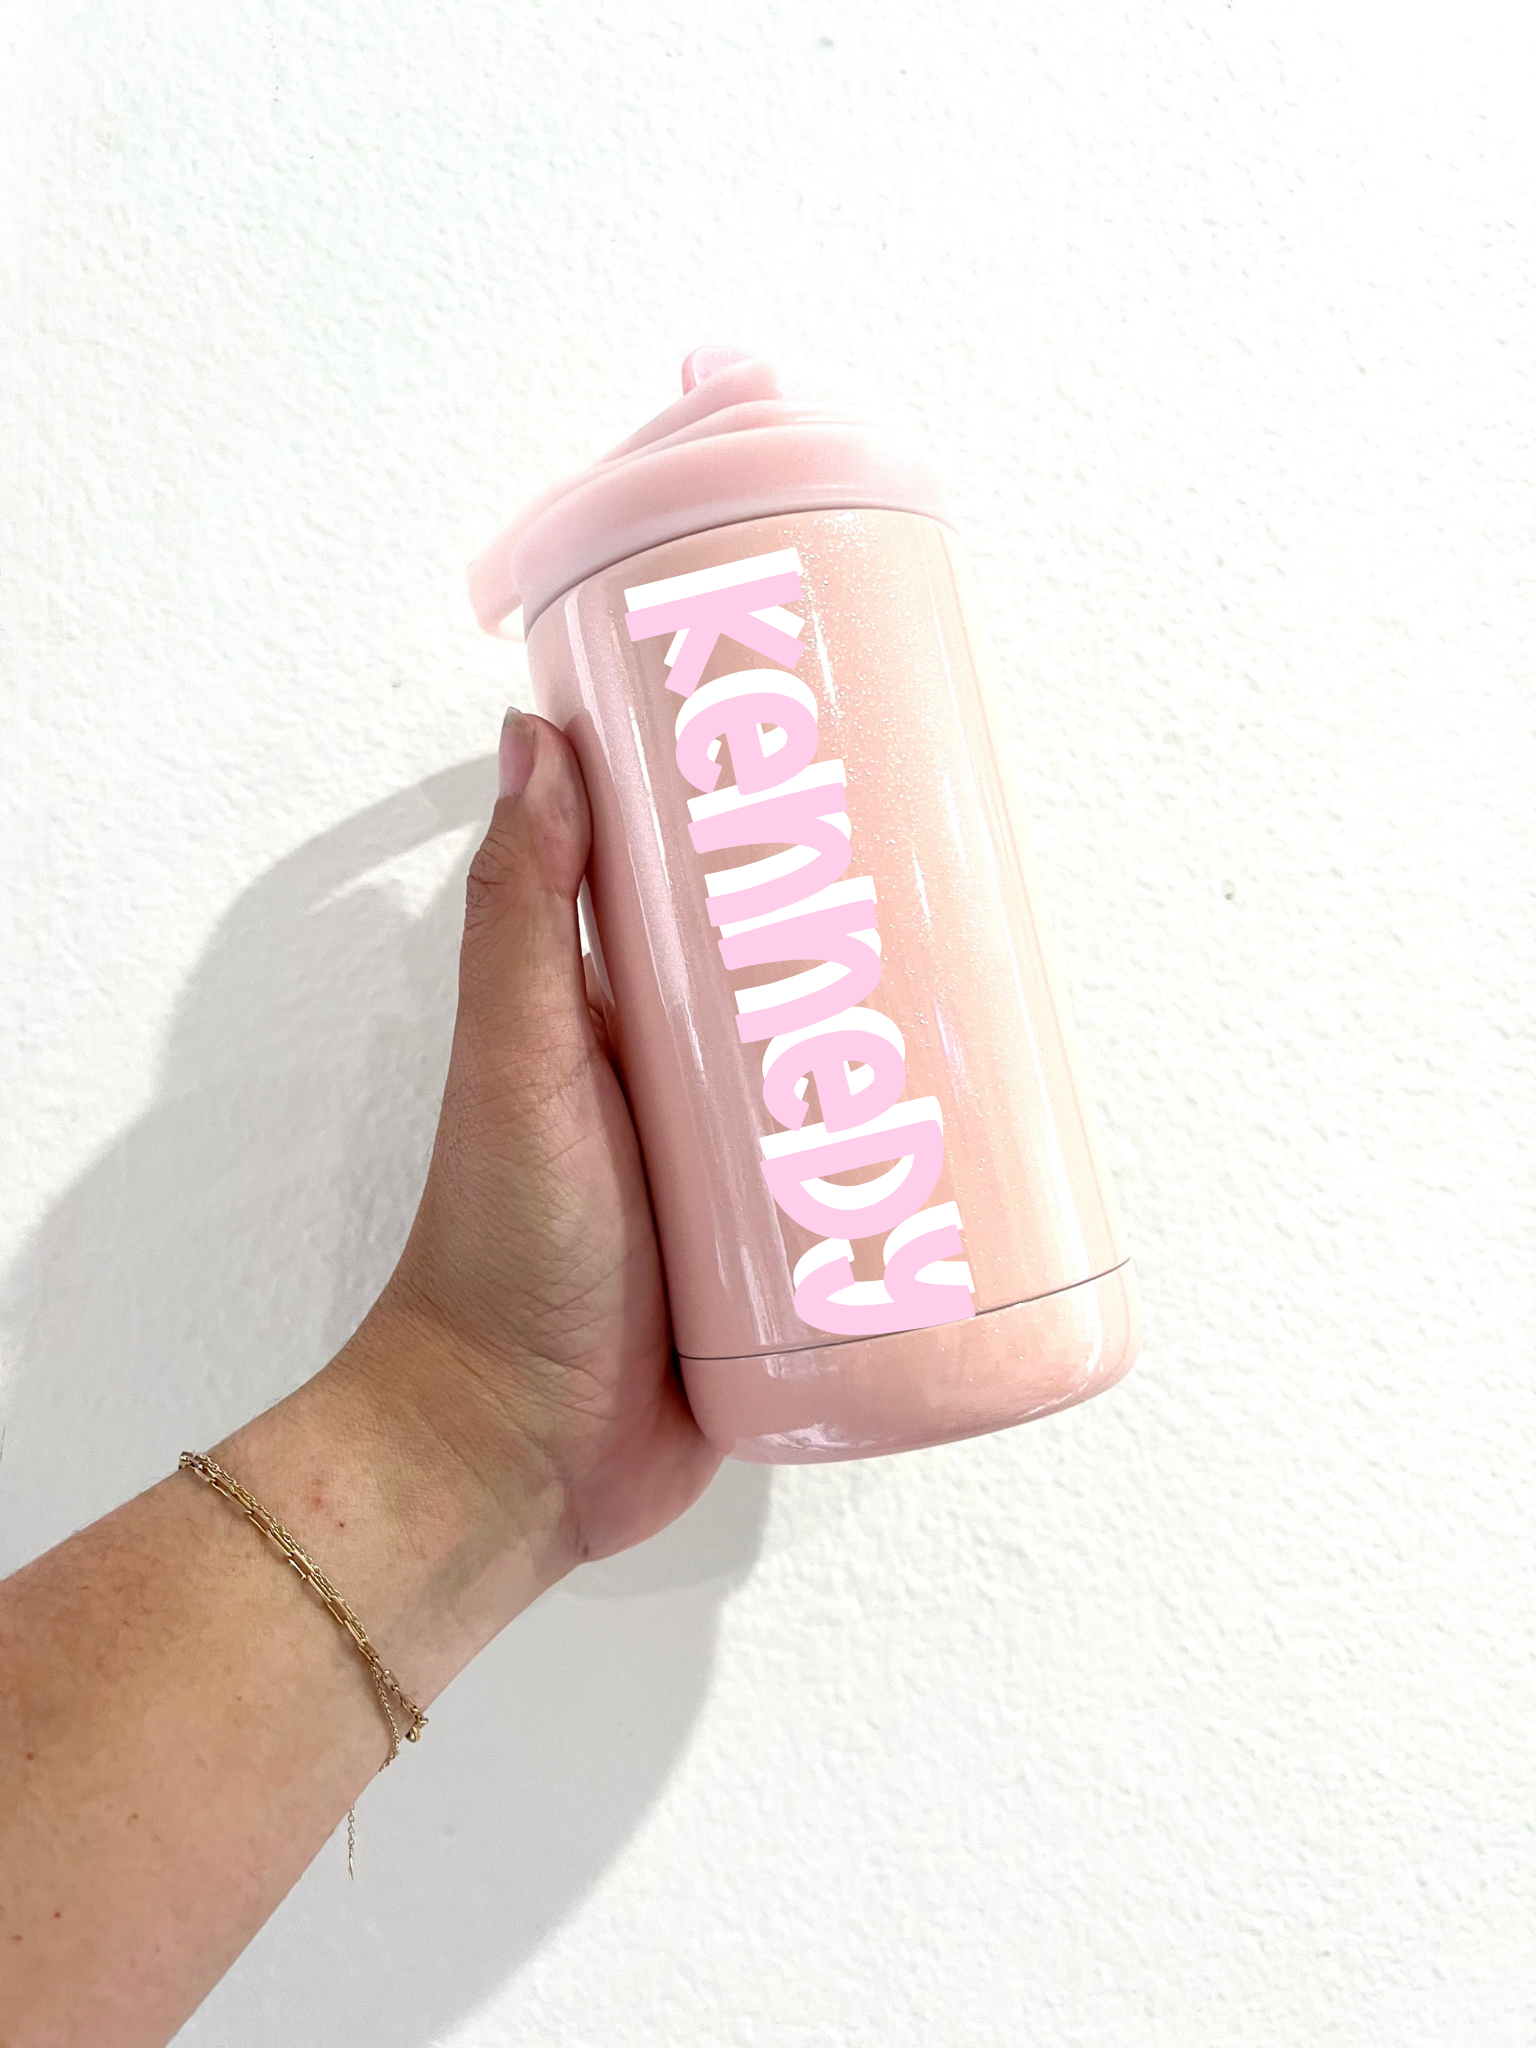 A Shiny Pink Letter Personalized Thermos Bottle